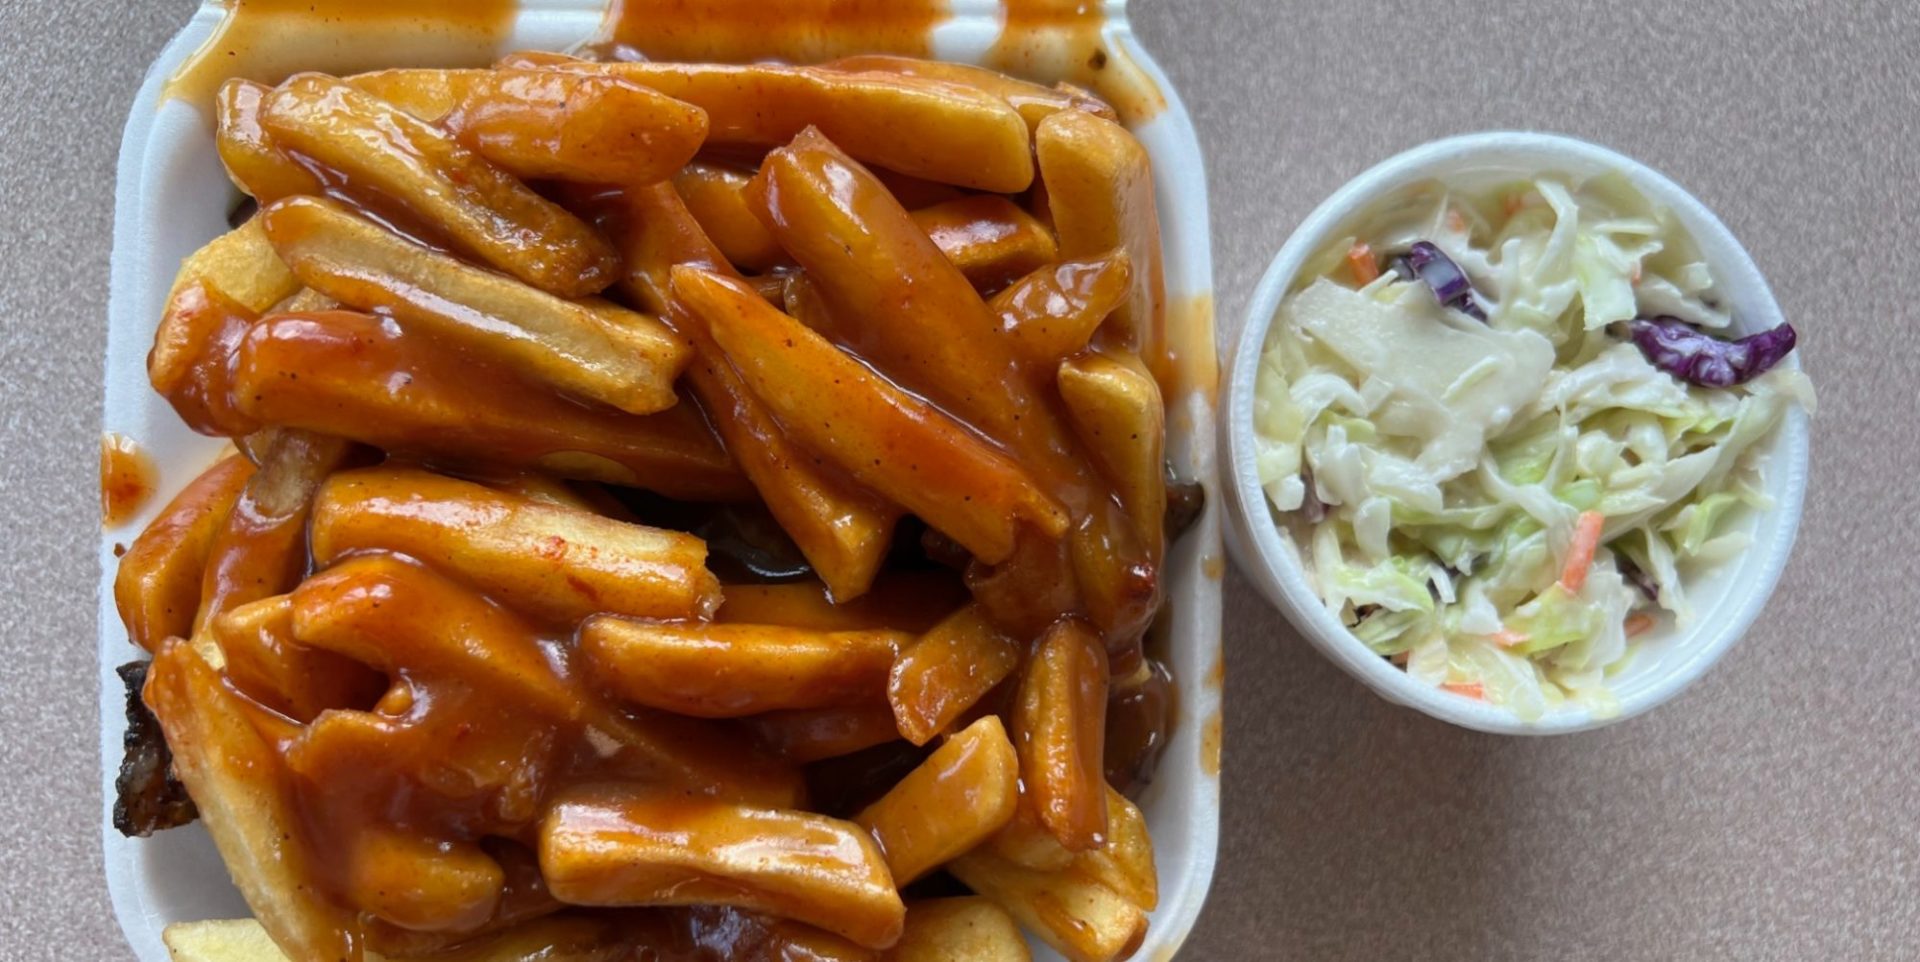 A styrofoam container of jerk rib tips topped with fries and barbecue sauce beside a styrofoam cup of coleslaw.